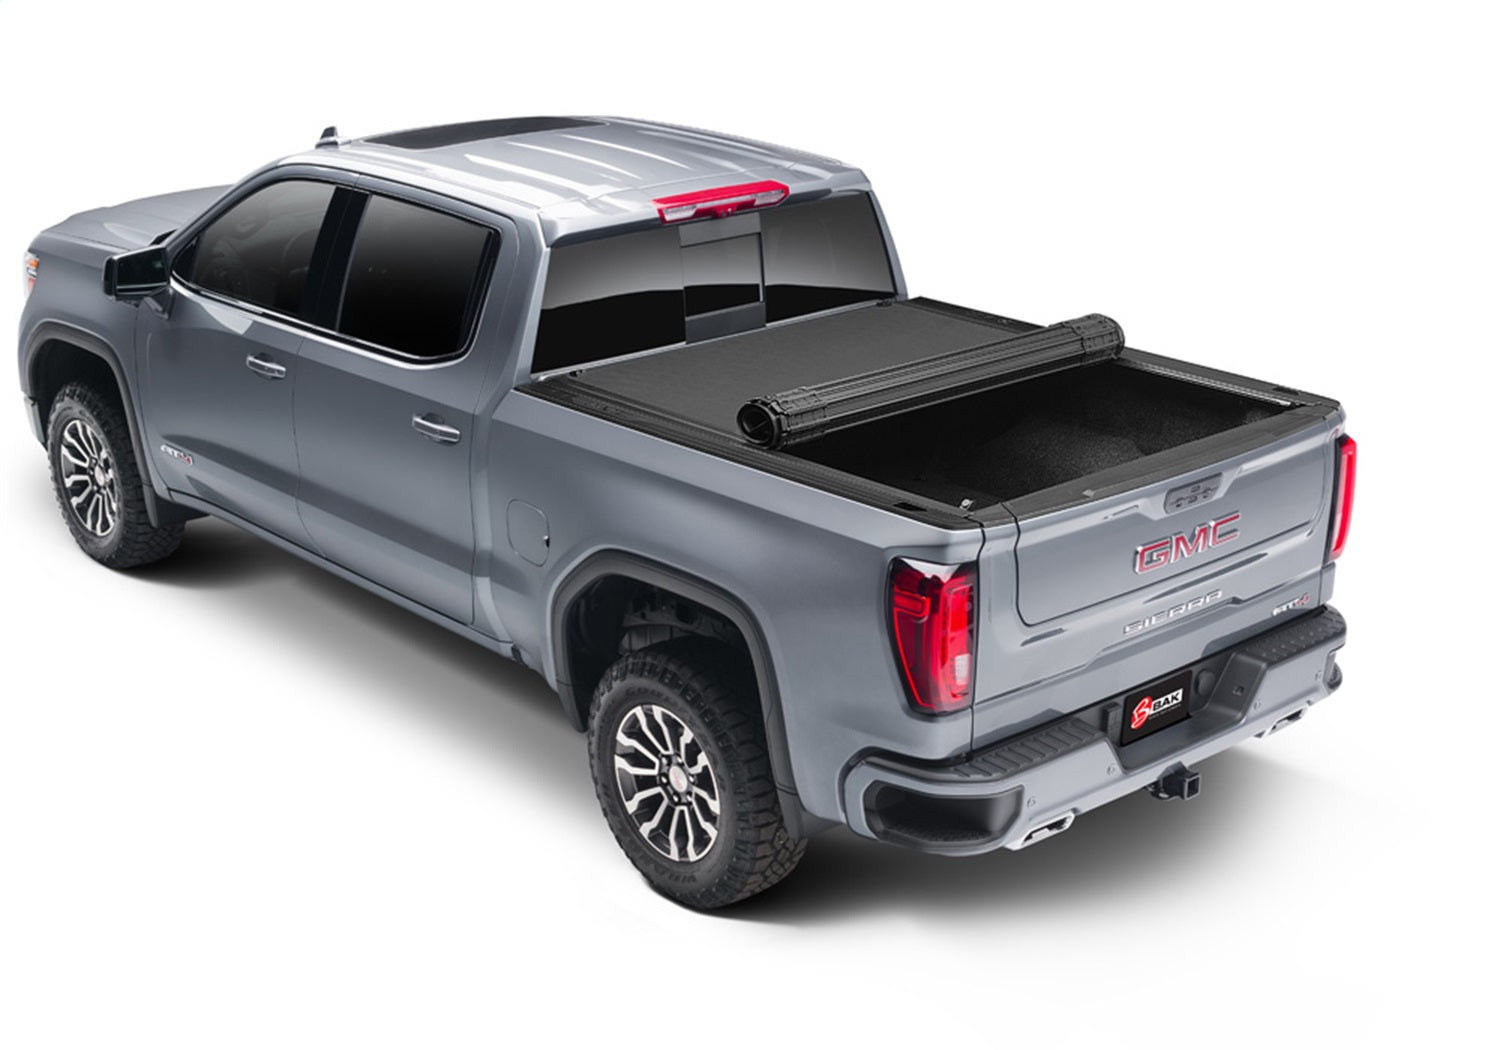 BAK Industries 80135 Revolver X4s Hard Rolling Truck Bed Cover Fits Sierra 1500